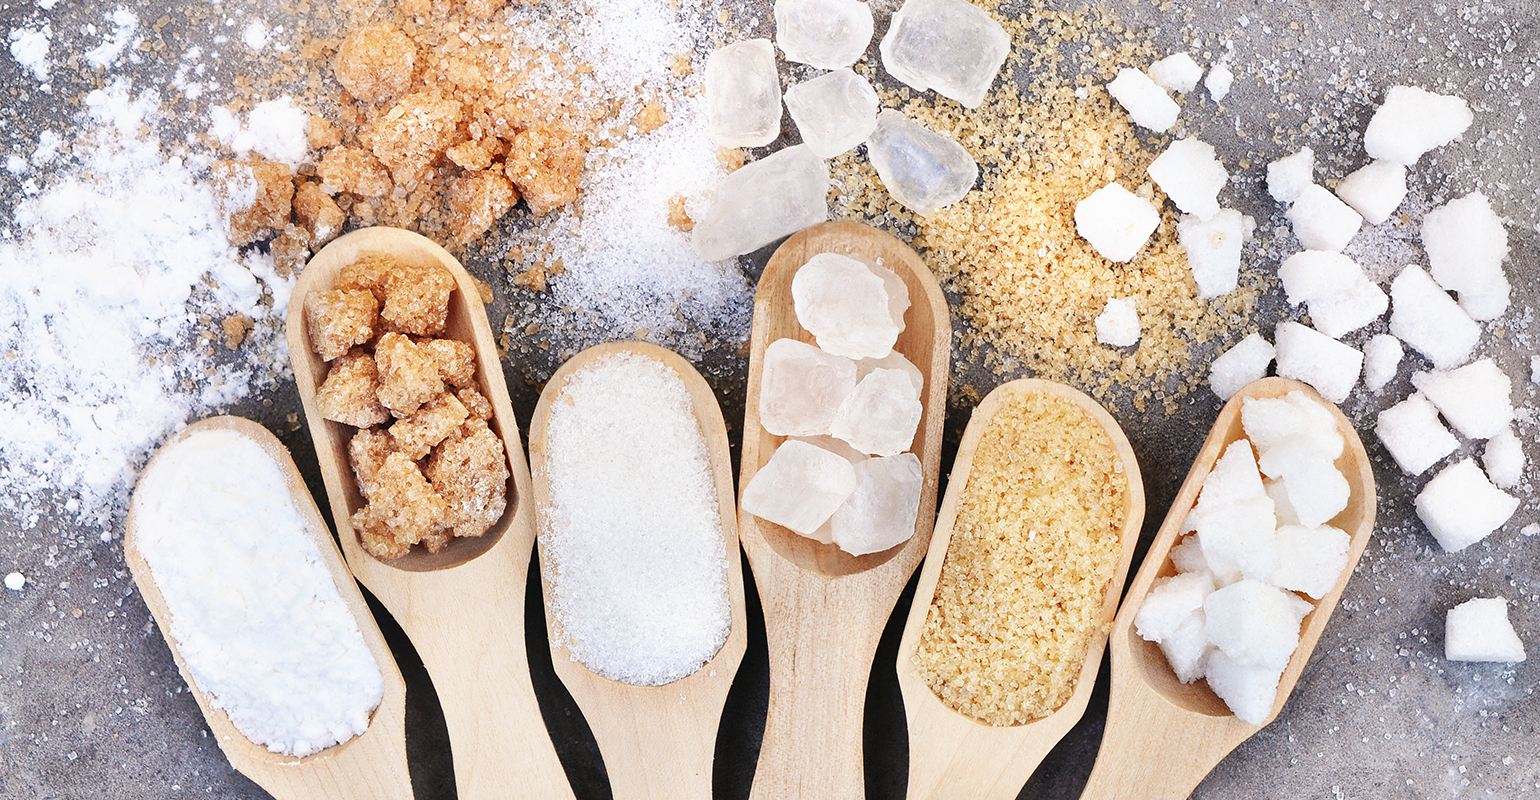 Upcycling for sugar reduction in food: new ingredients to sweeten the market